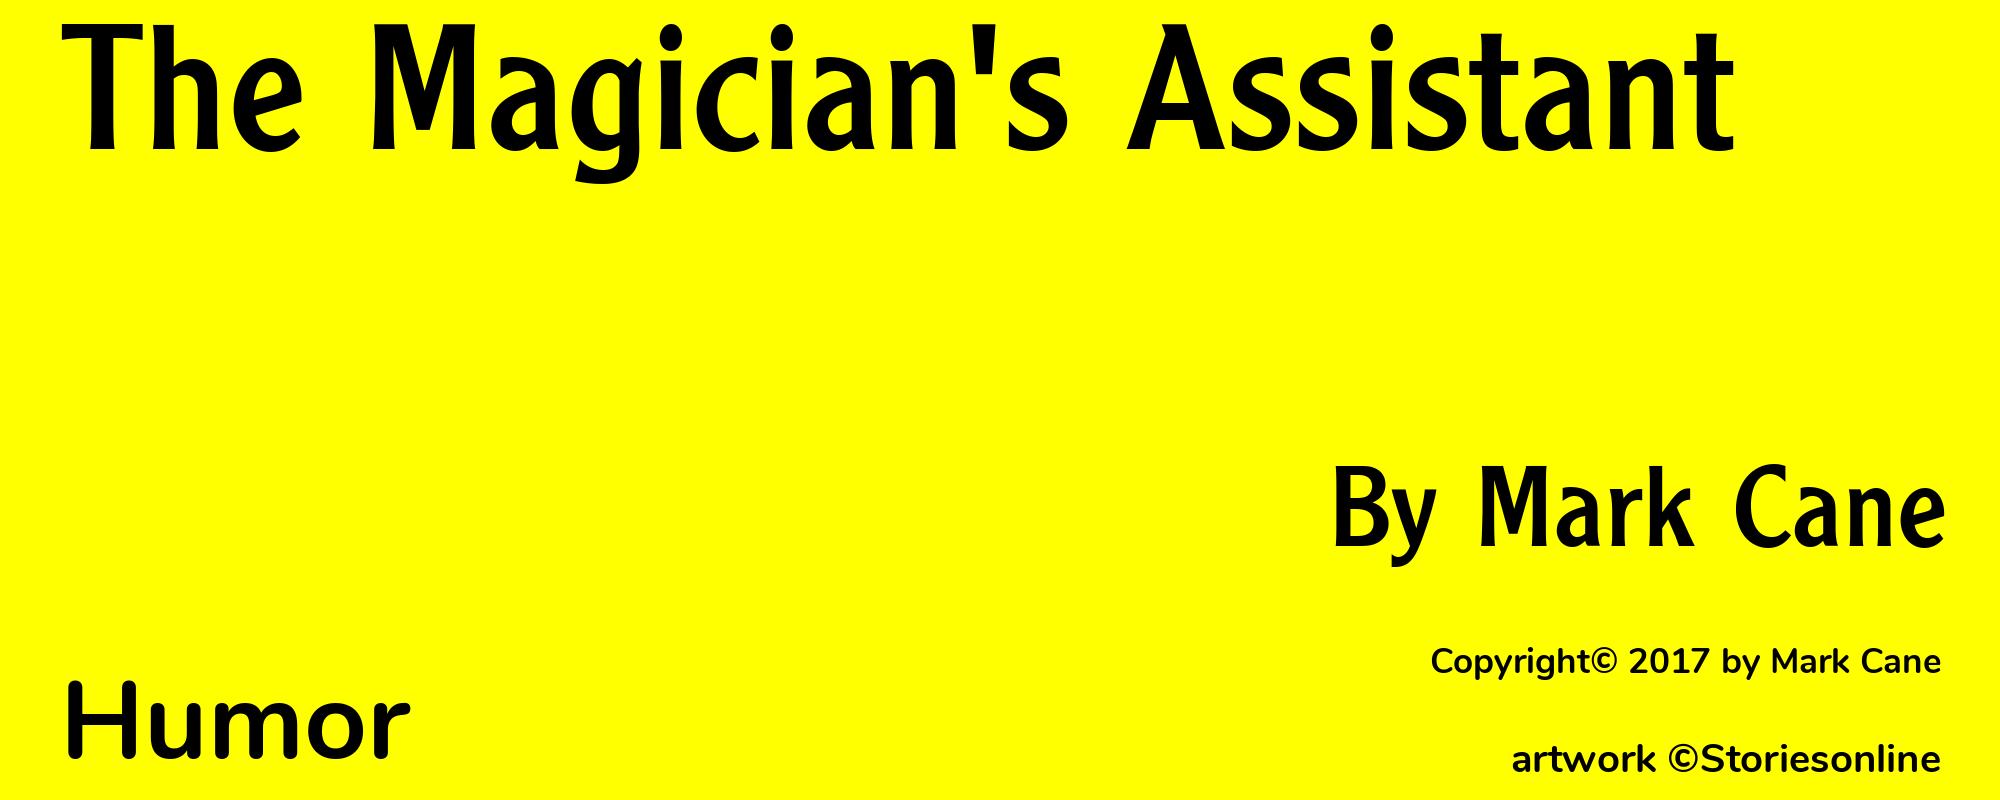 The Magician's Assistant - Cover